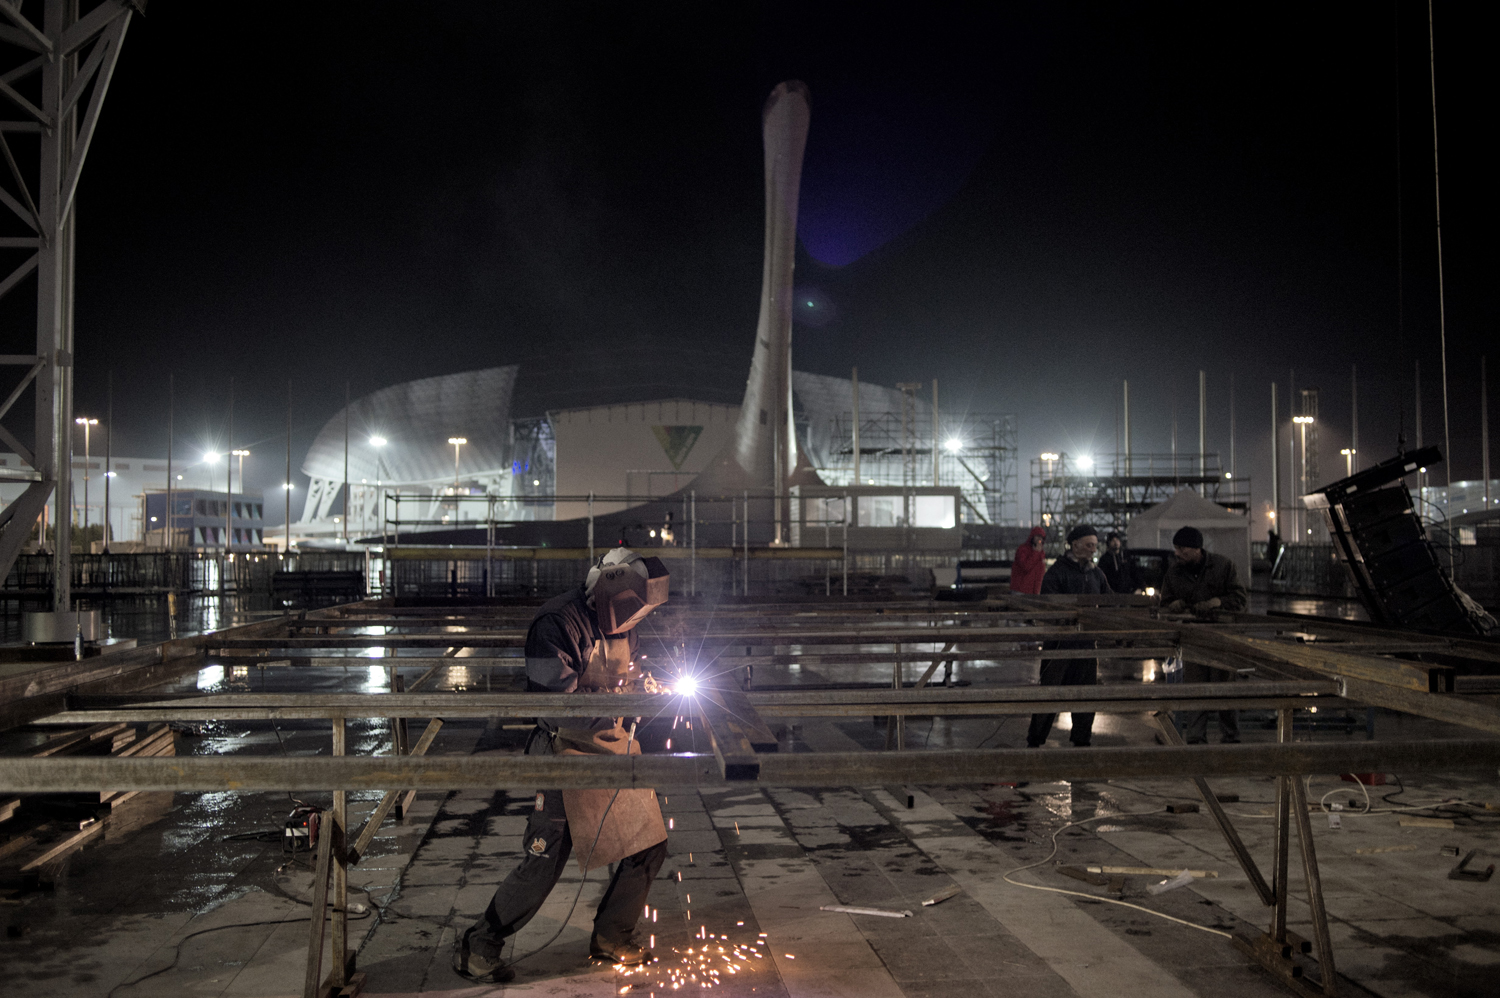 Sochi, Russia, Jan. 17, 2014: A welder assembles the frame for the winners' podium of the Winter Olympic Games.